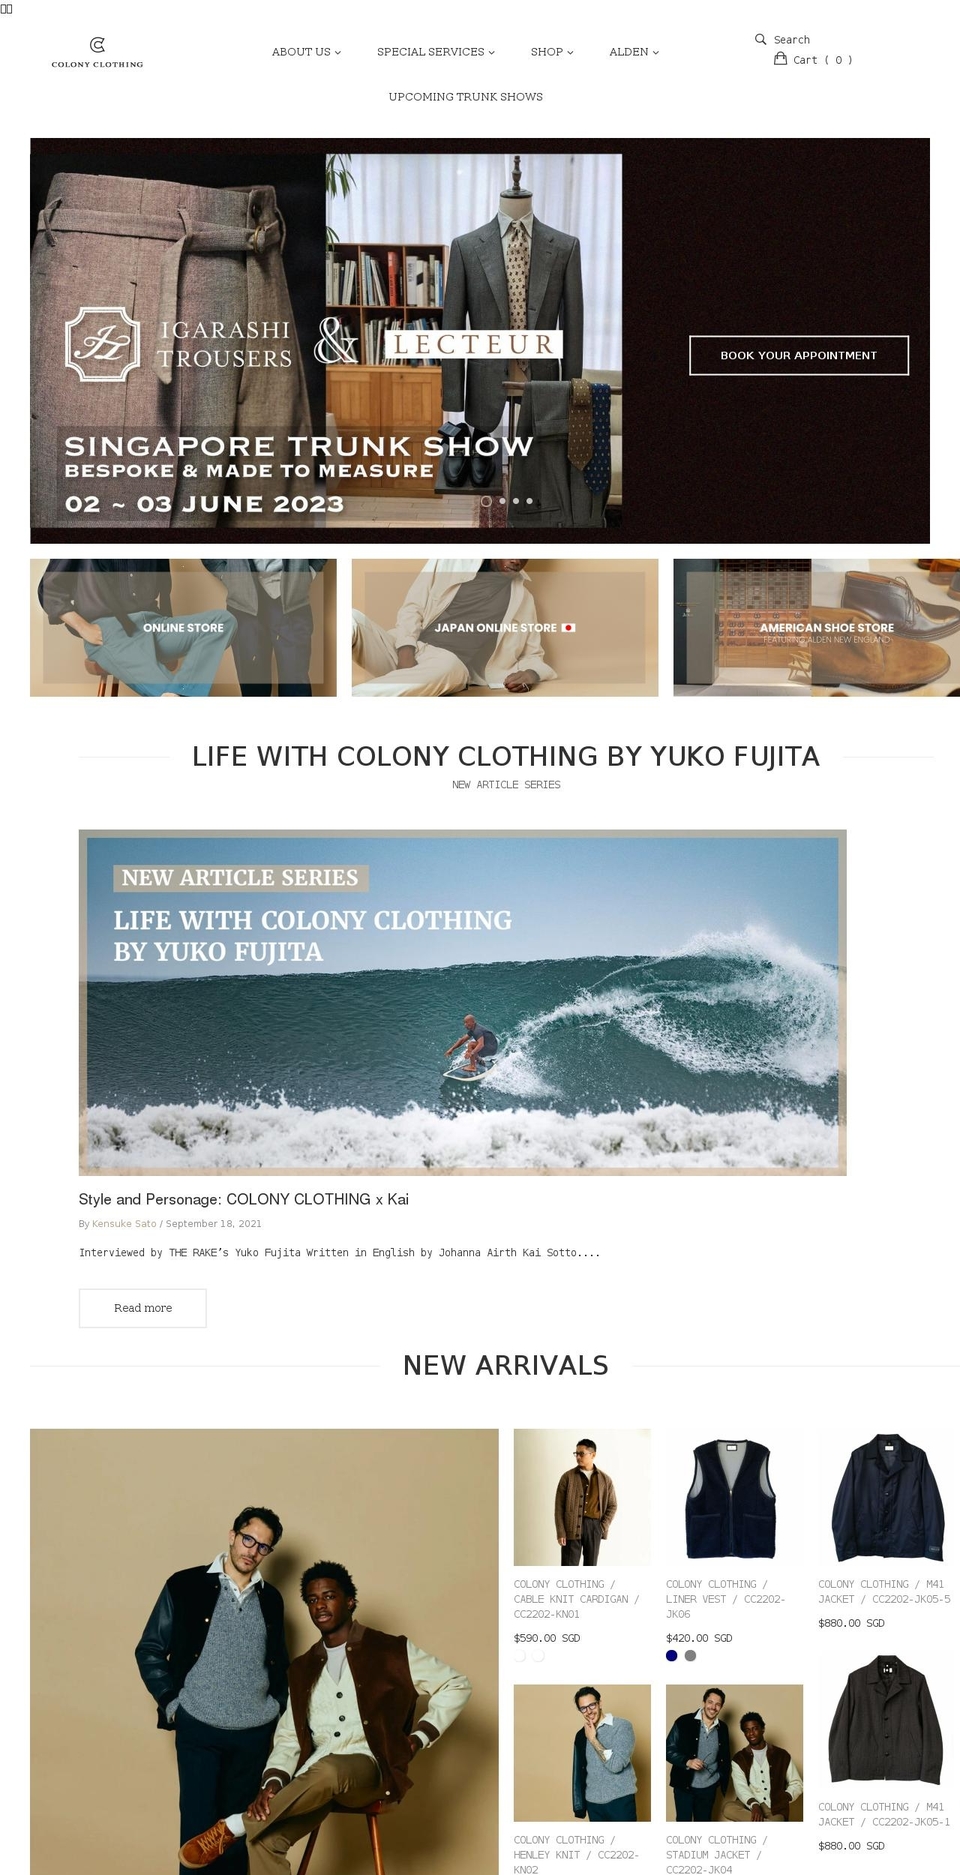 furniture Shopify theme site example colonyclothing.net